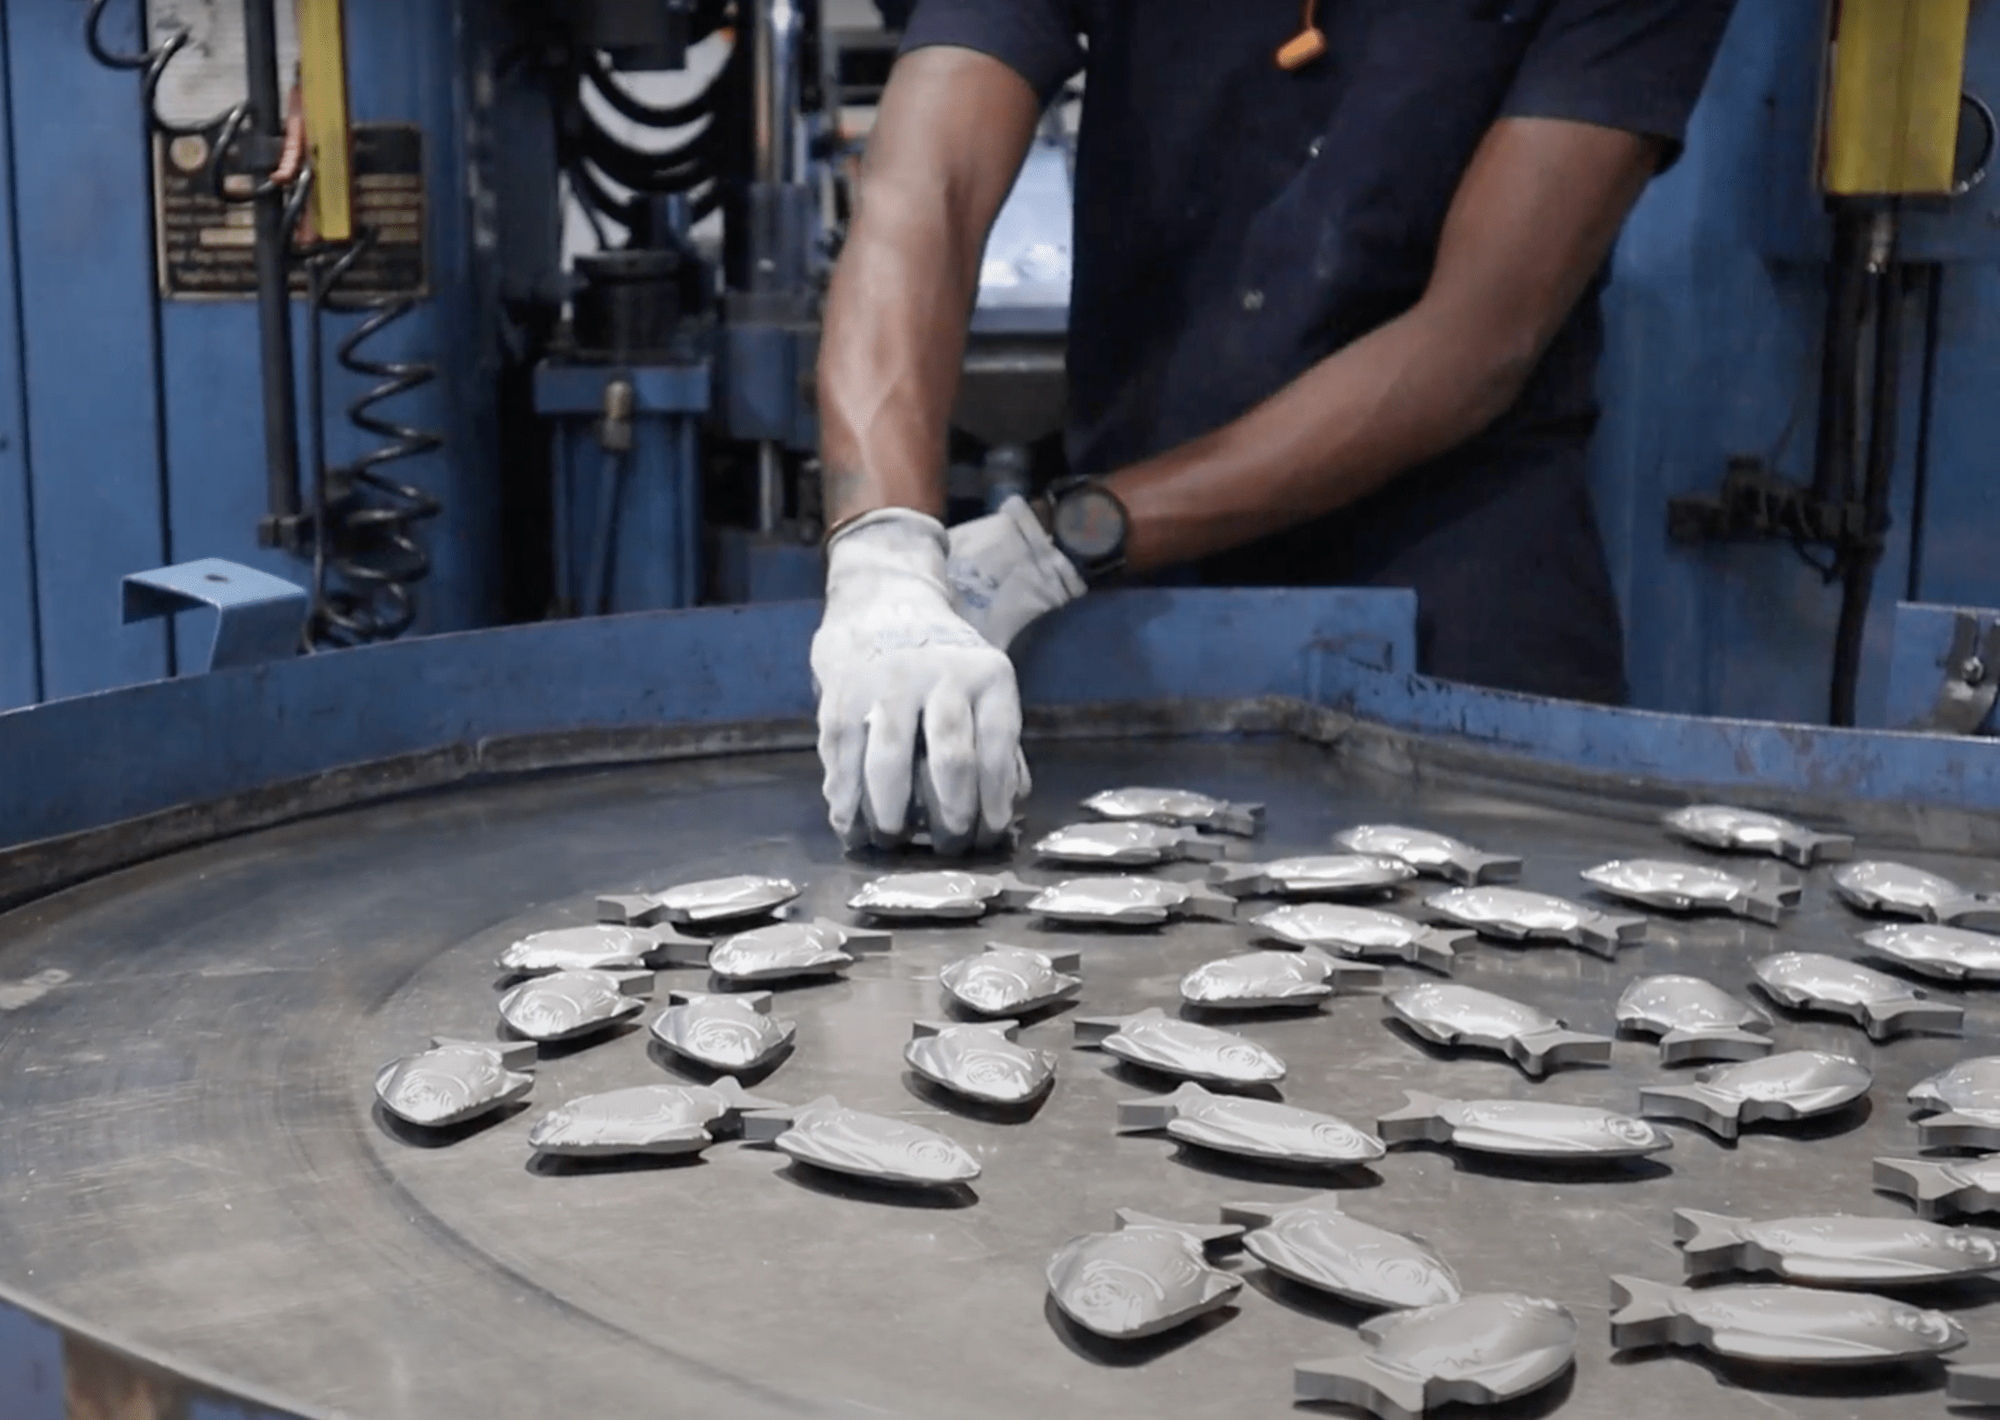 Quality factory employee handing Lucky Iron Fish product